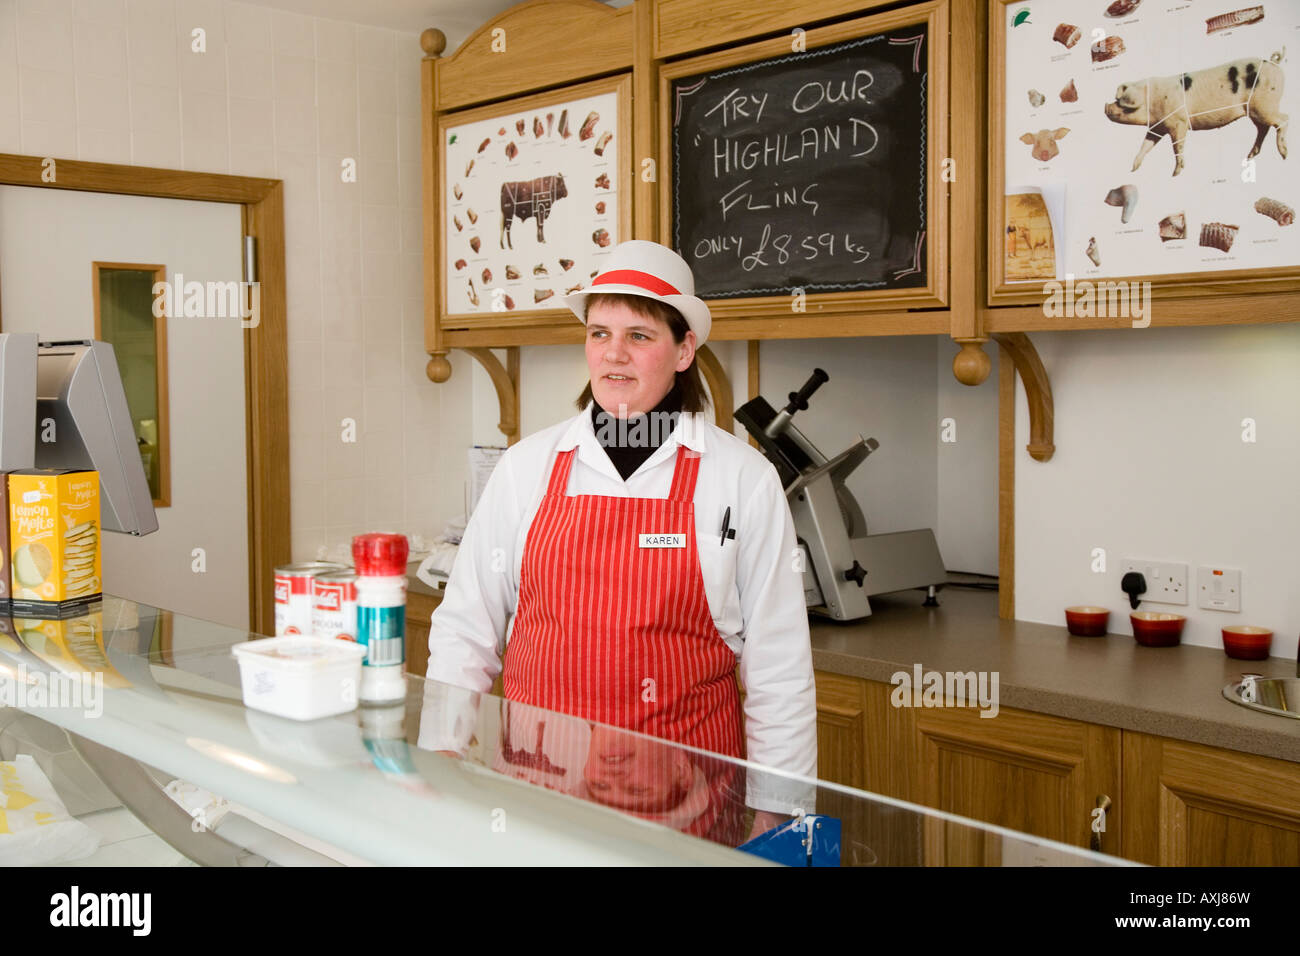 Butchers Assistant in Shop wearing Red Apron  W Irvine Butchers Blairgowrie, Scotland uk Stock Photo